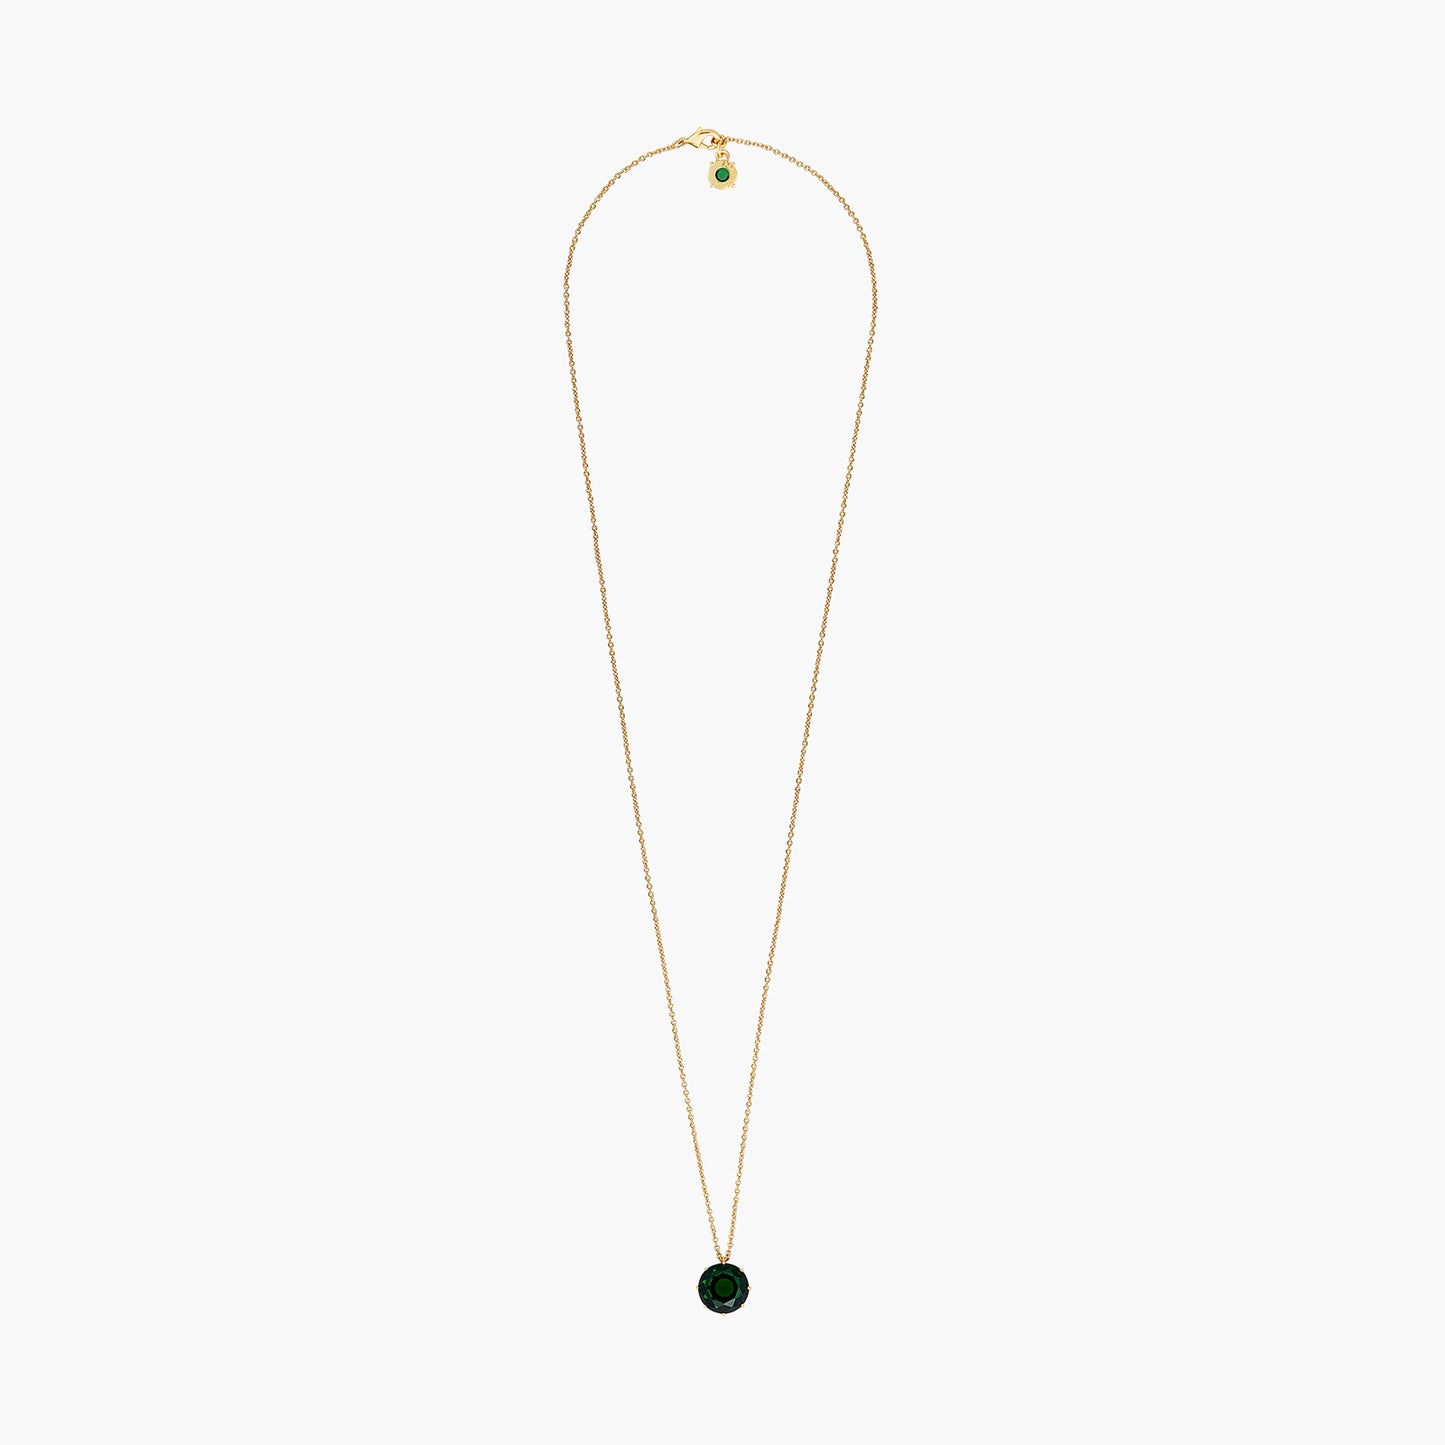 Emerald Green Round Stone Diamantine Long Necklace | AOLD3331